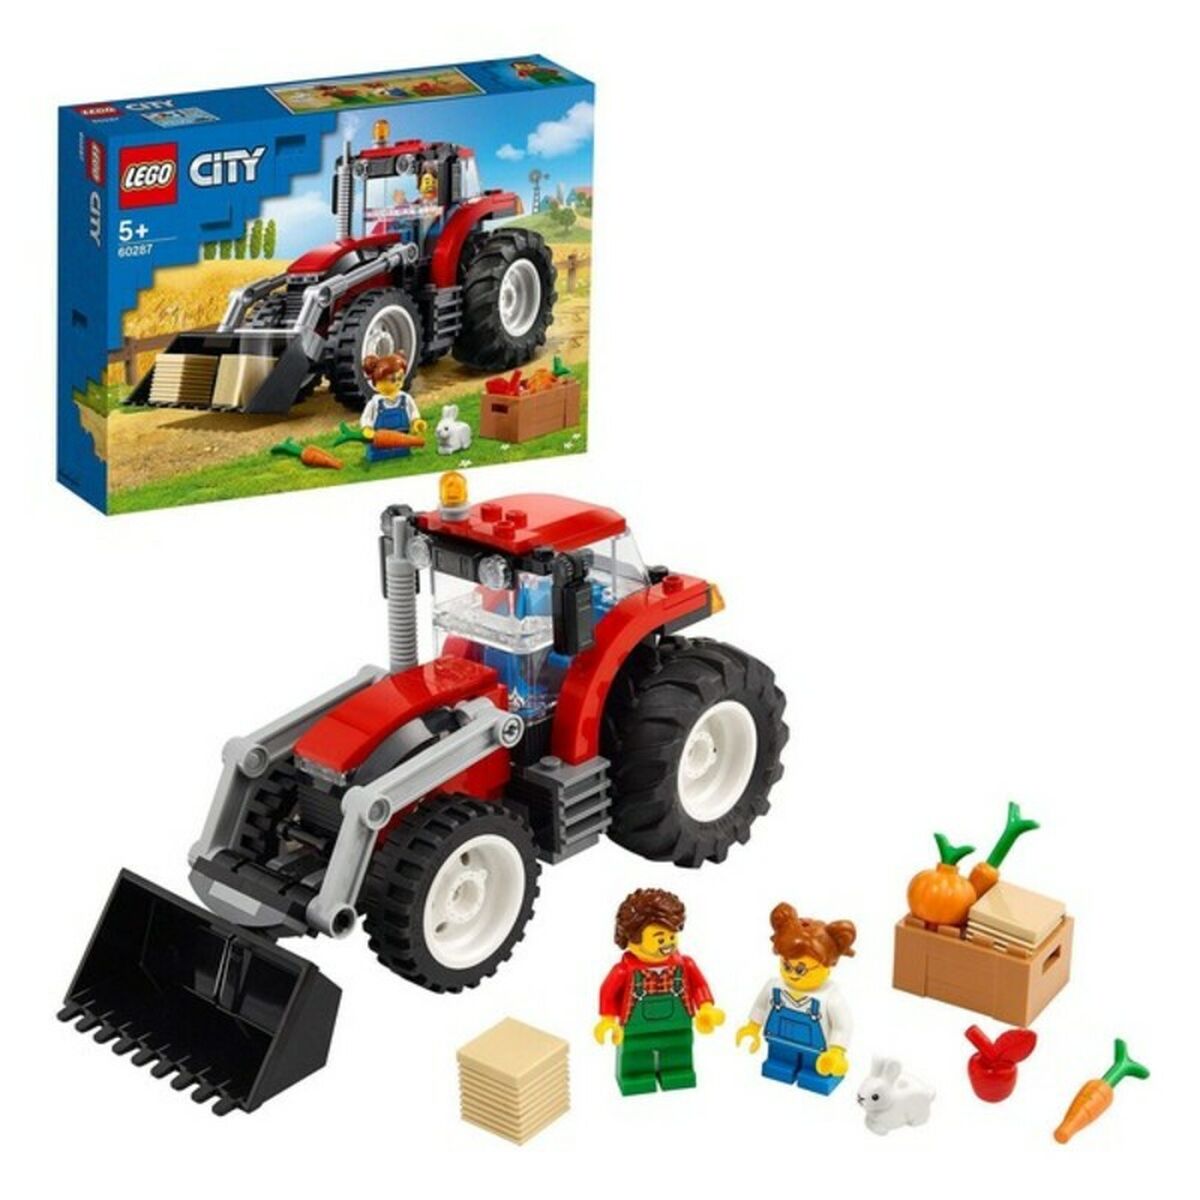 Playset City Great Vehicles Tractor Lego 60287 (148 PC)